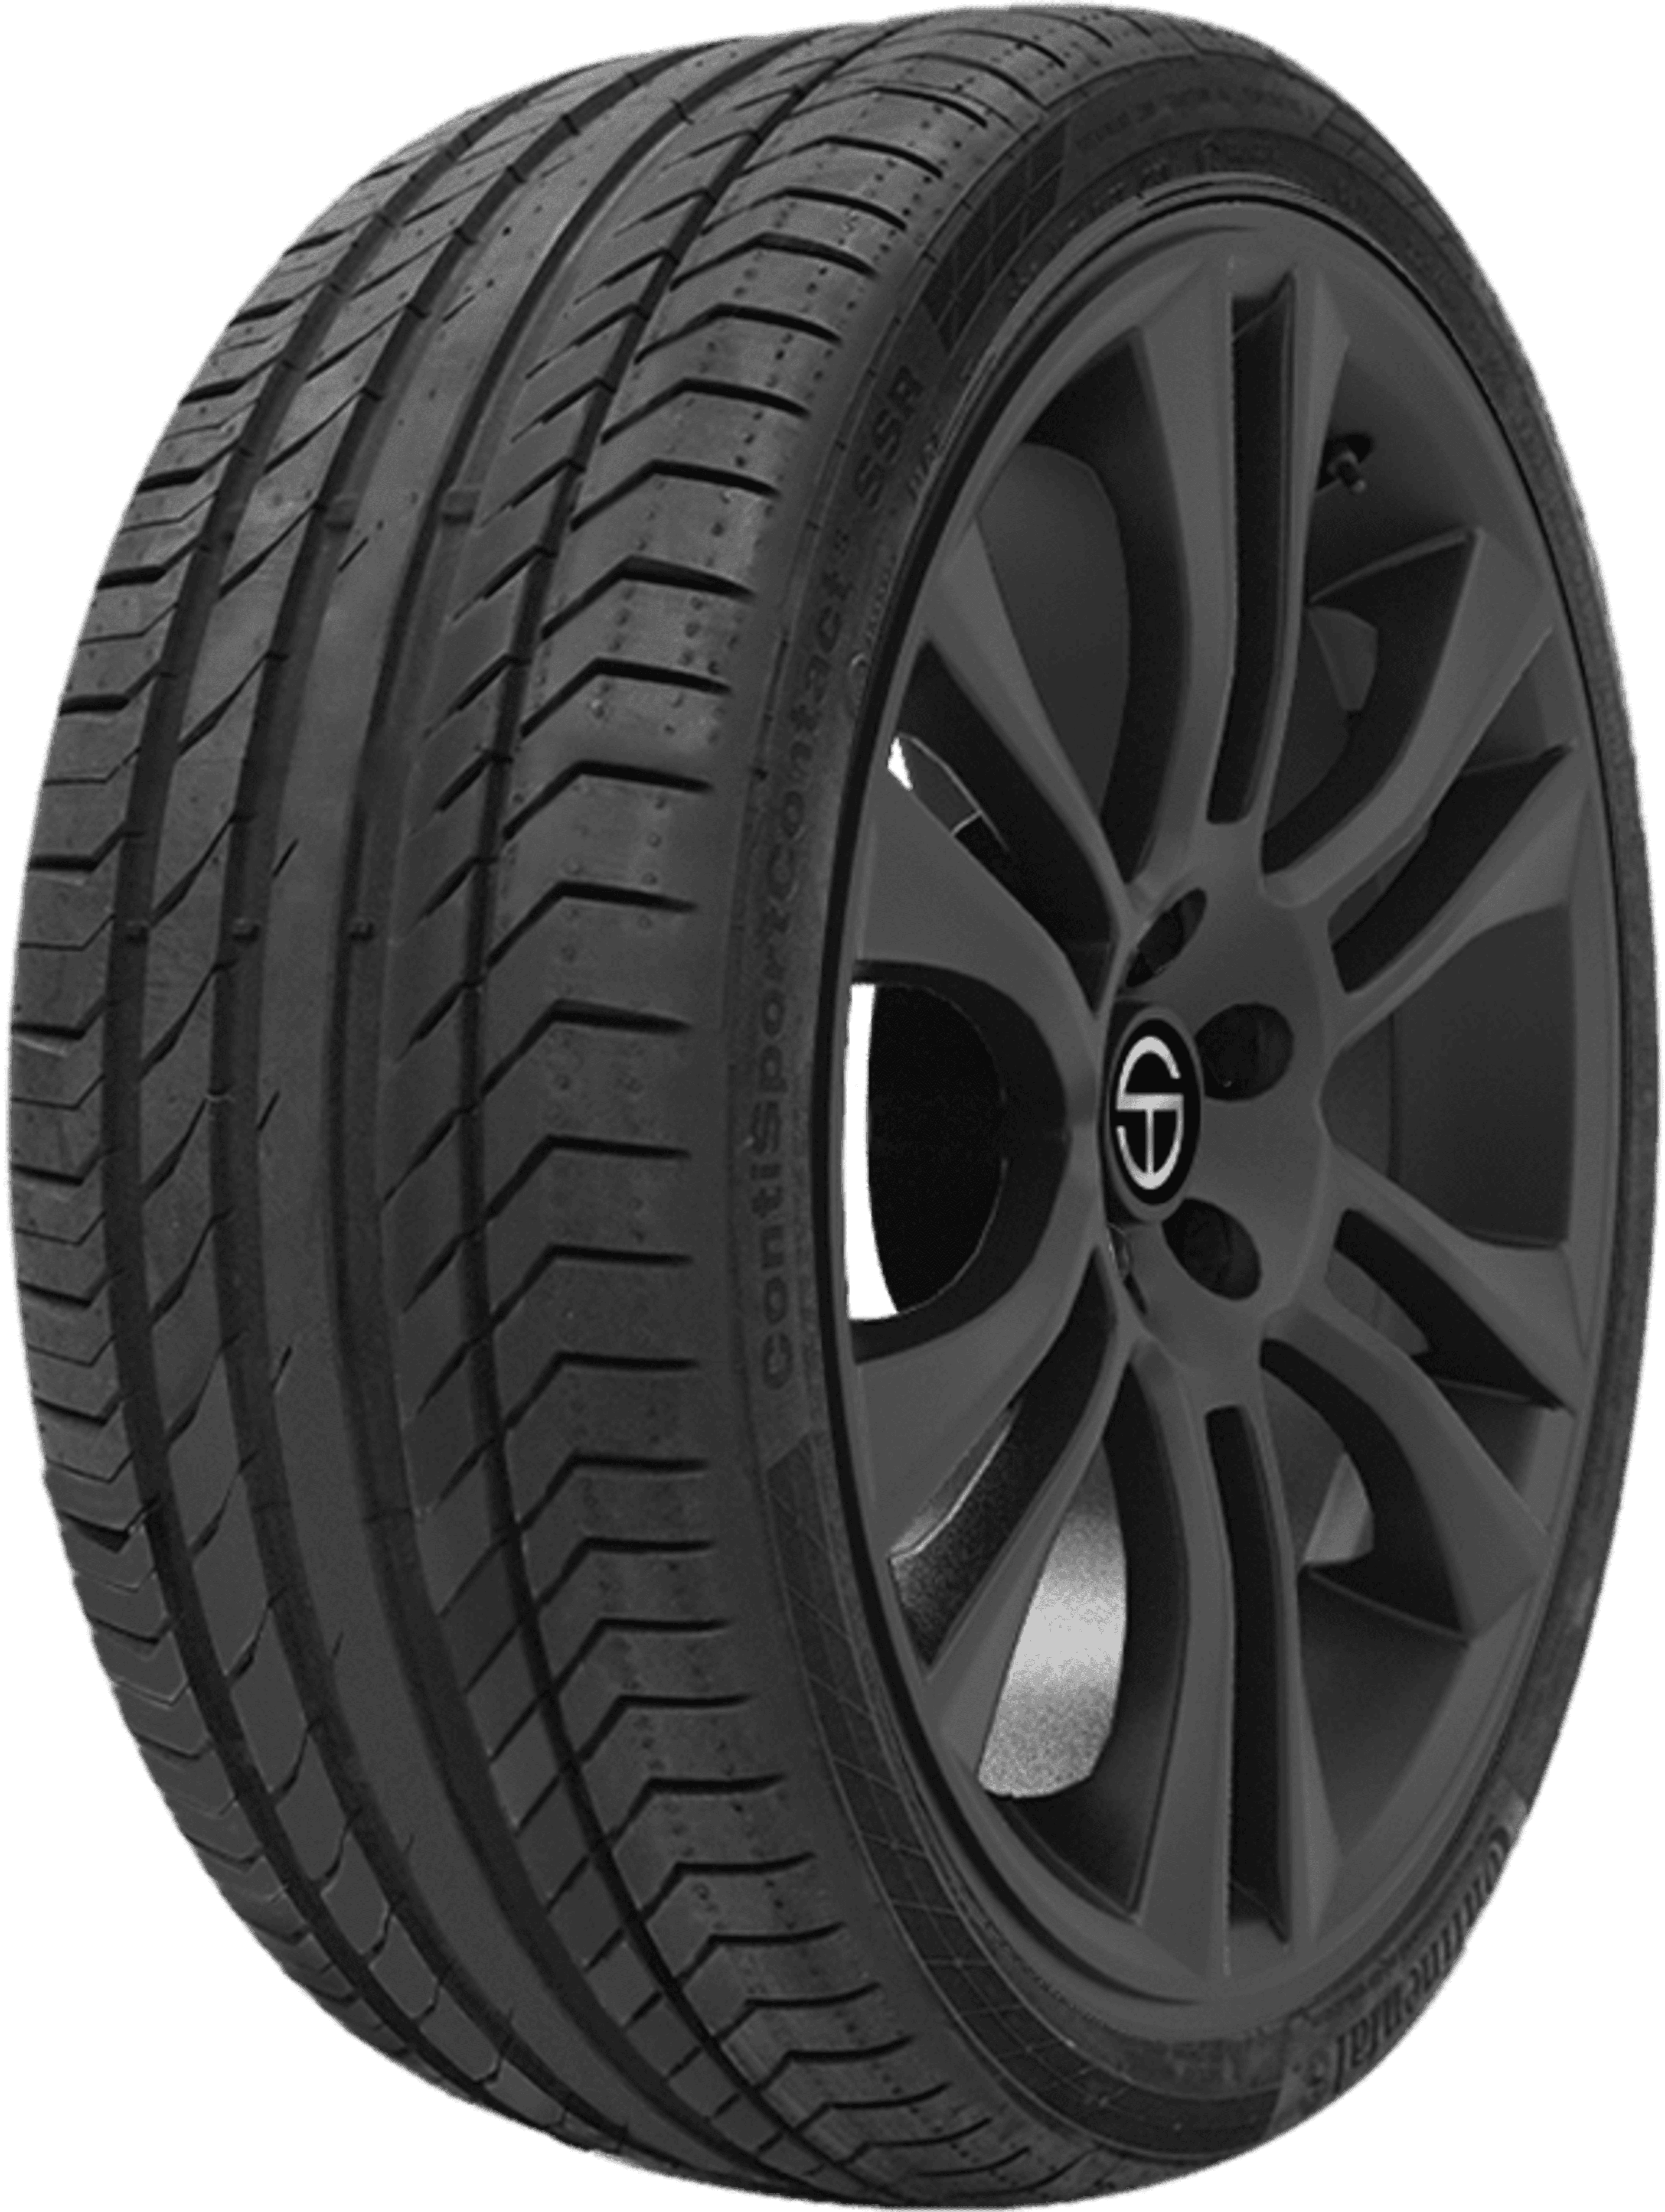 Buy Continental ContiSportContact 5 - SSR Tires Online | SimpleTire